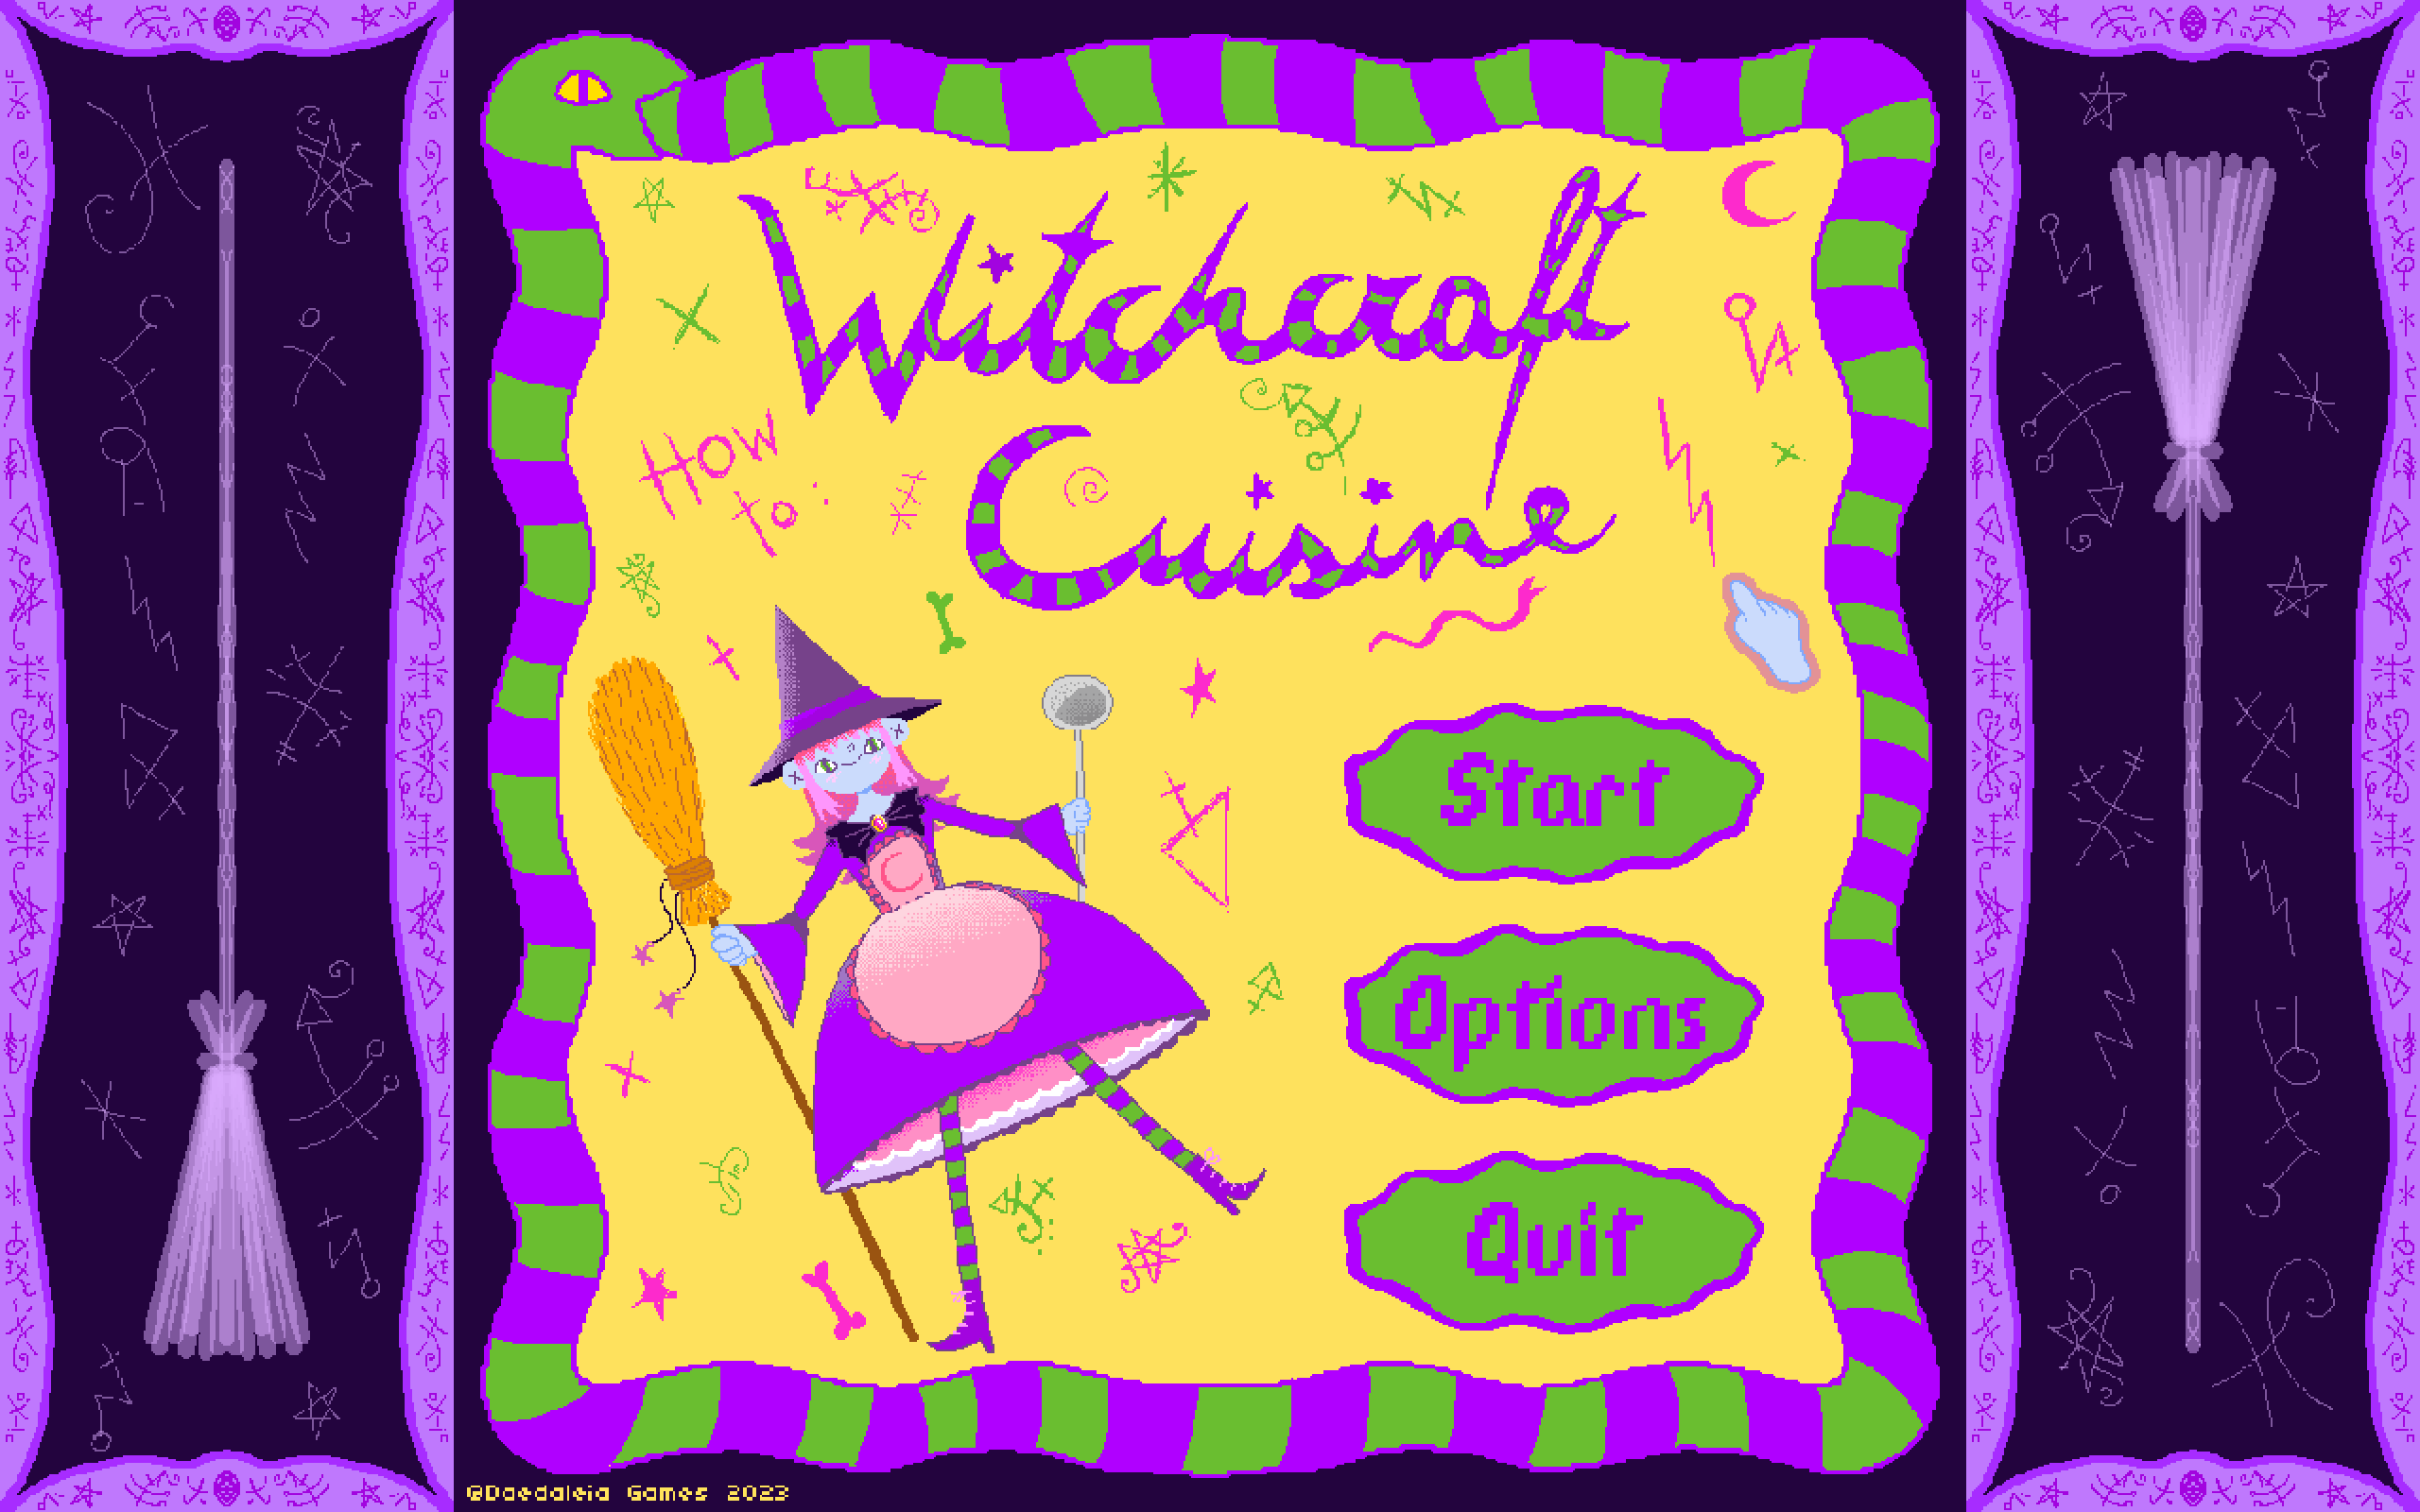 Zoomed screenshot of How to: Witchcraft Cuisine